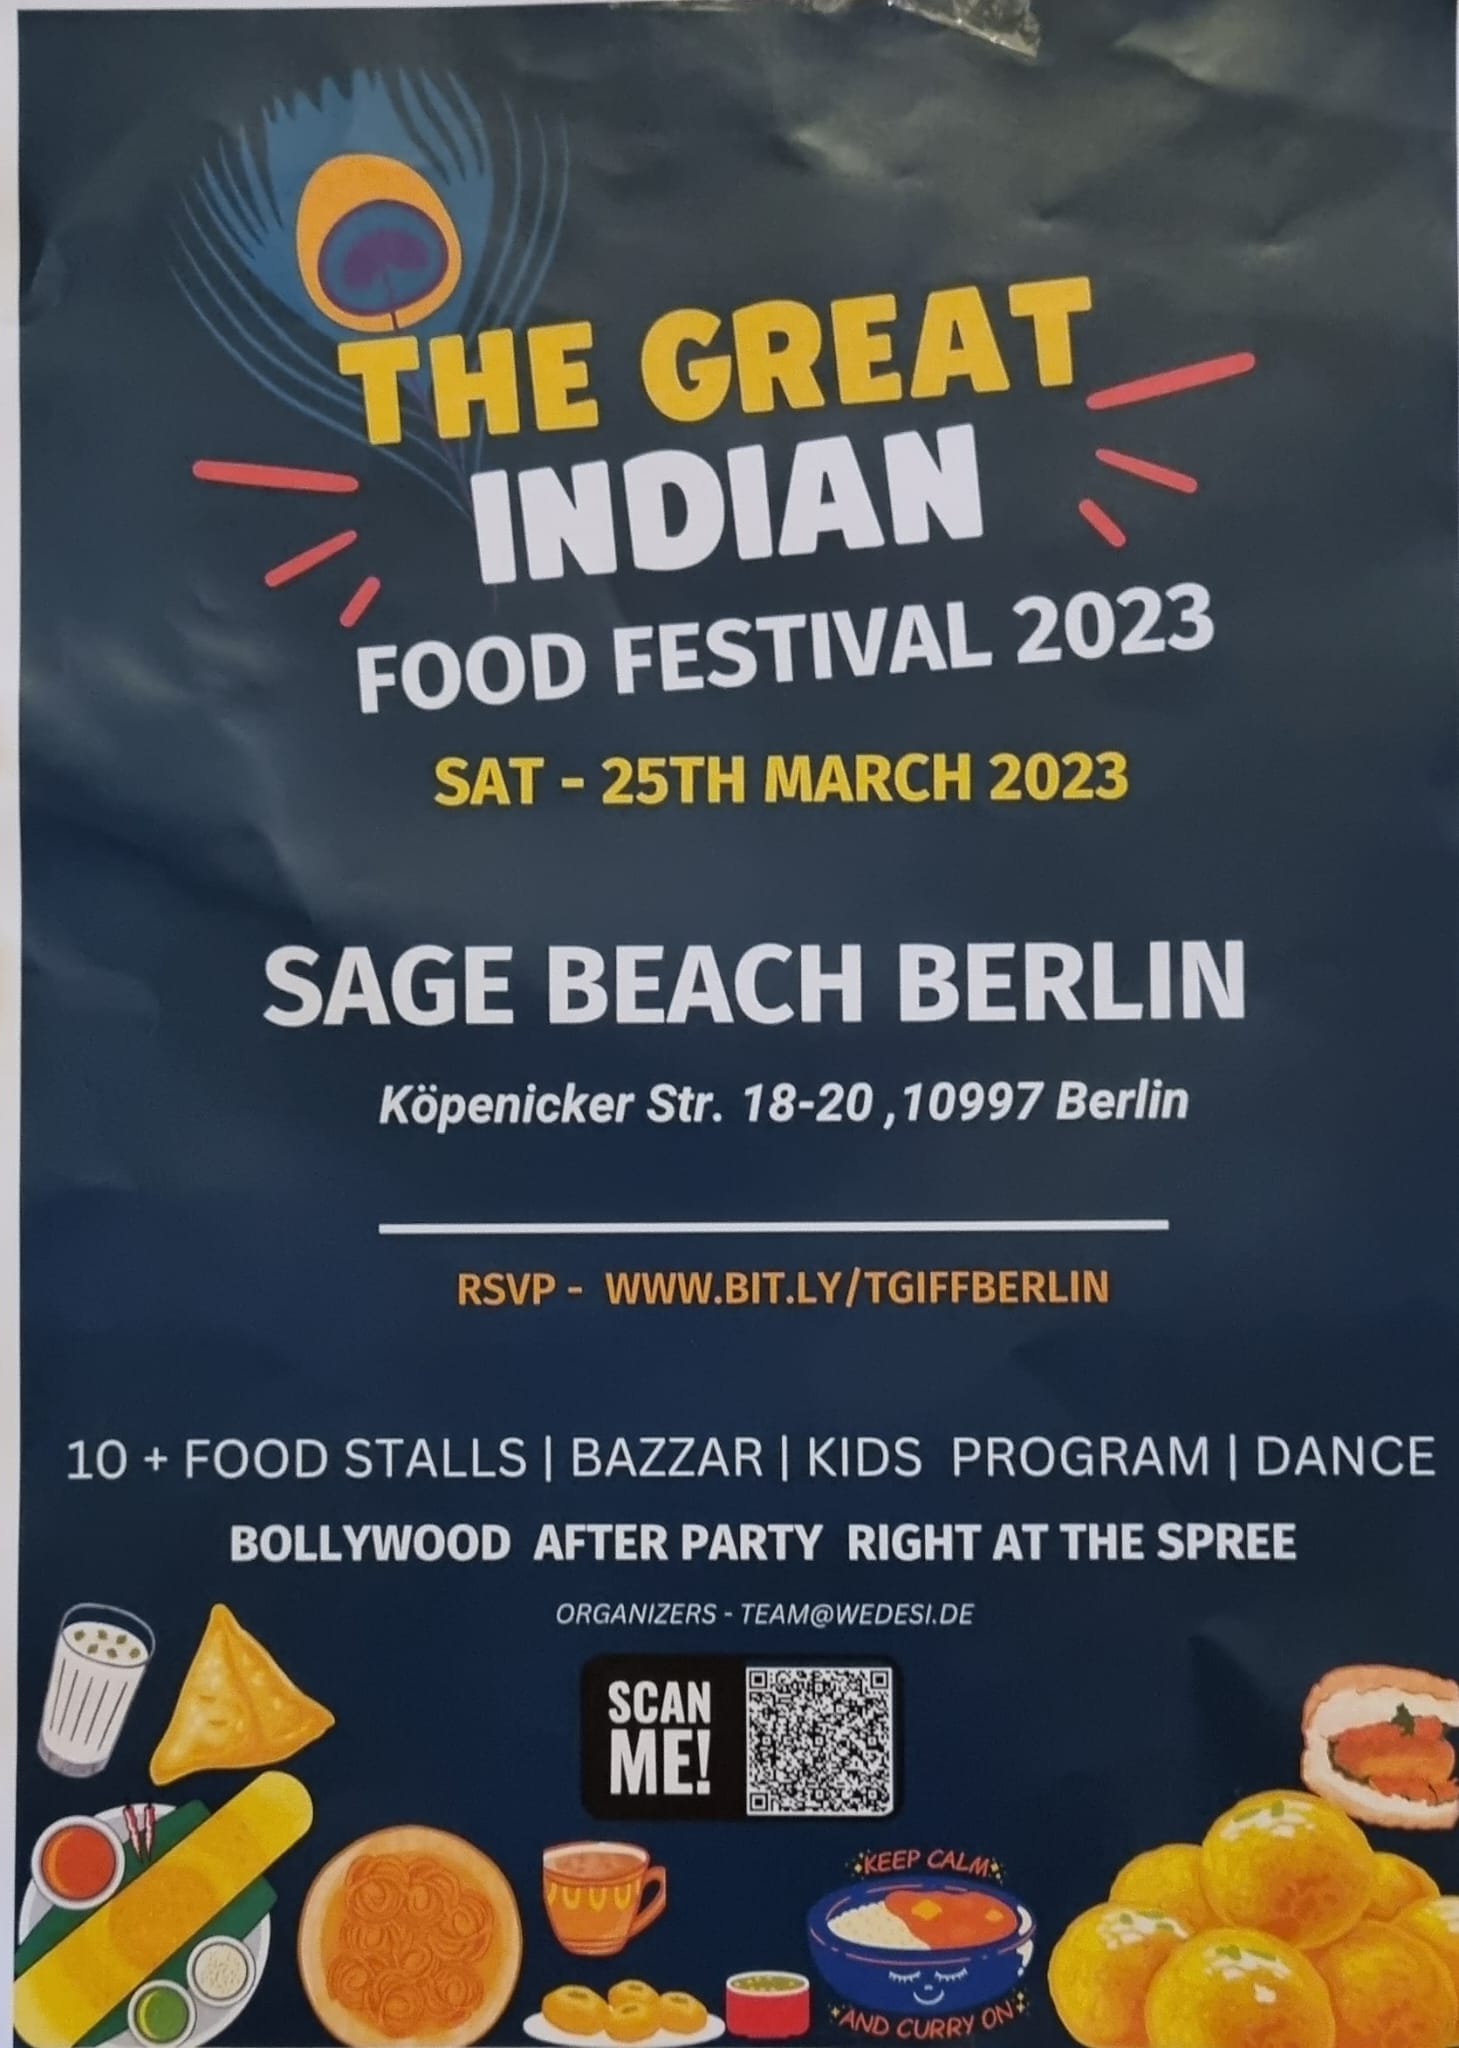 The Great Indian Food Festival 2023 on 25th March 2023 Indoeuropean.eu